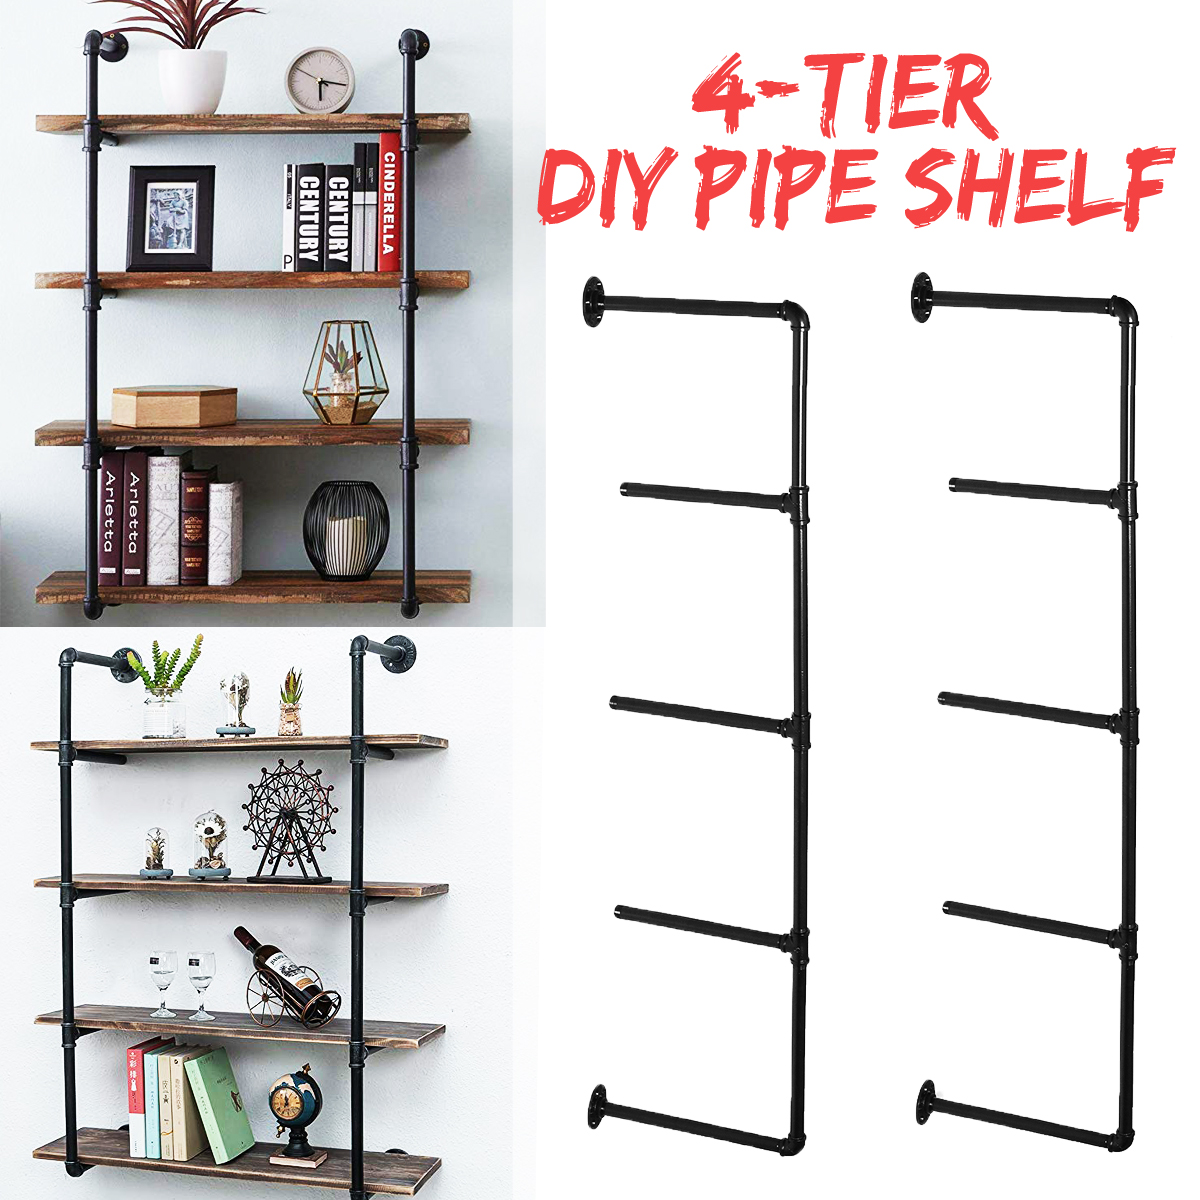 2Pcs 4/5-Tier Industrial Iron Pipe Shelf Brackets Wall-Mounted Bookshelf Frame, Customizable DIY Shelving, Floating Open Display Storage for Home, Office, Commercial Use - image 1 of 7